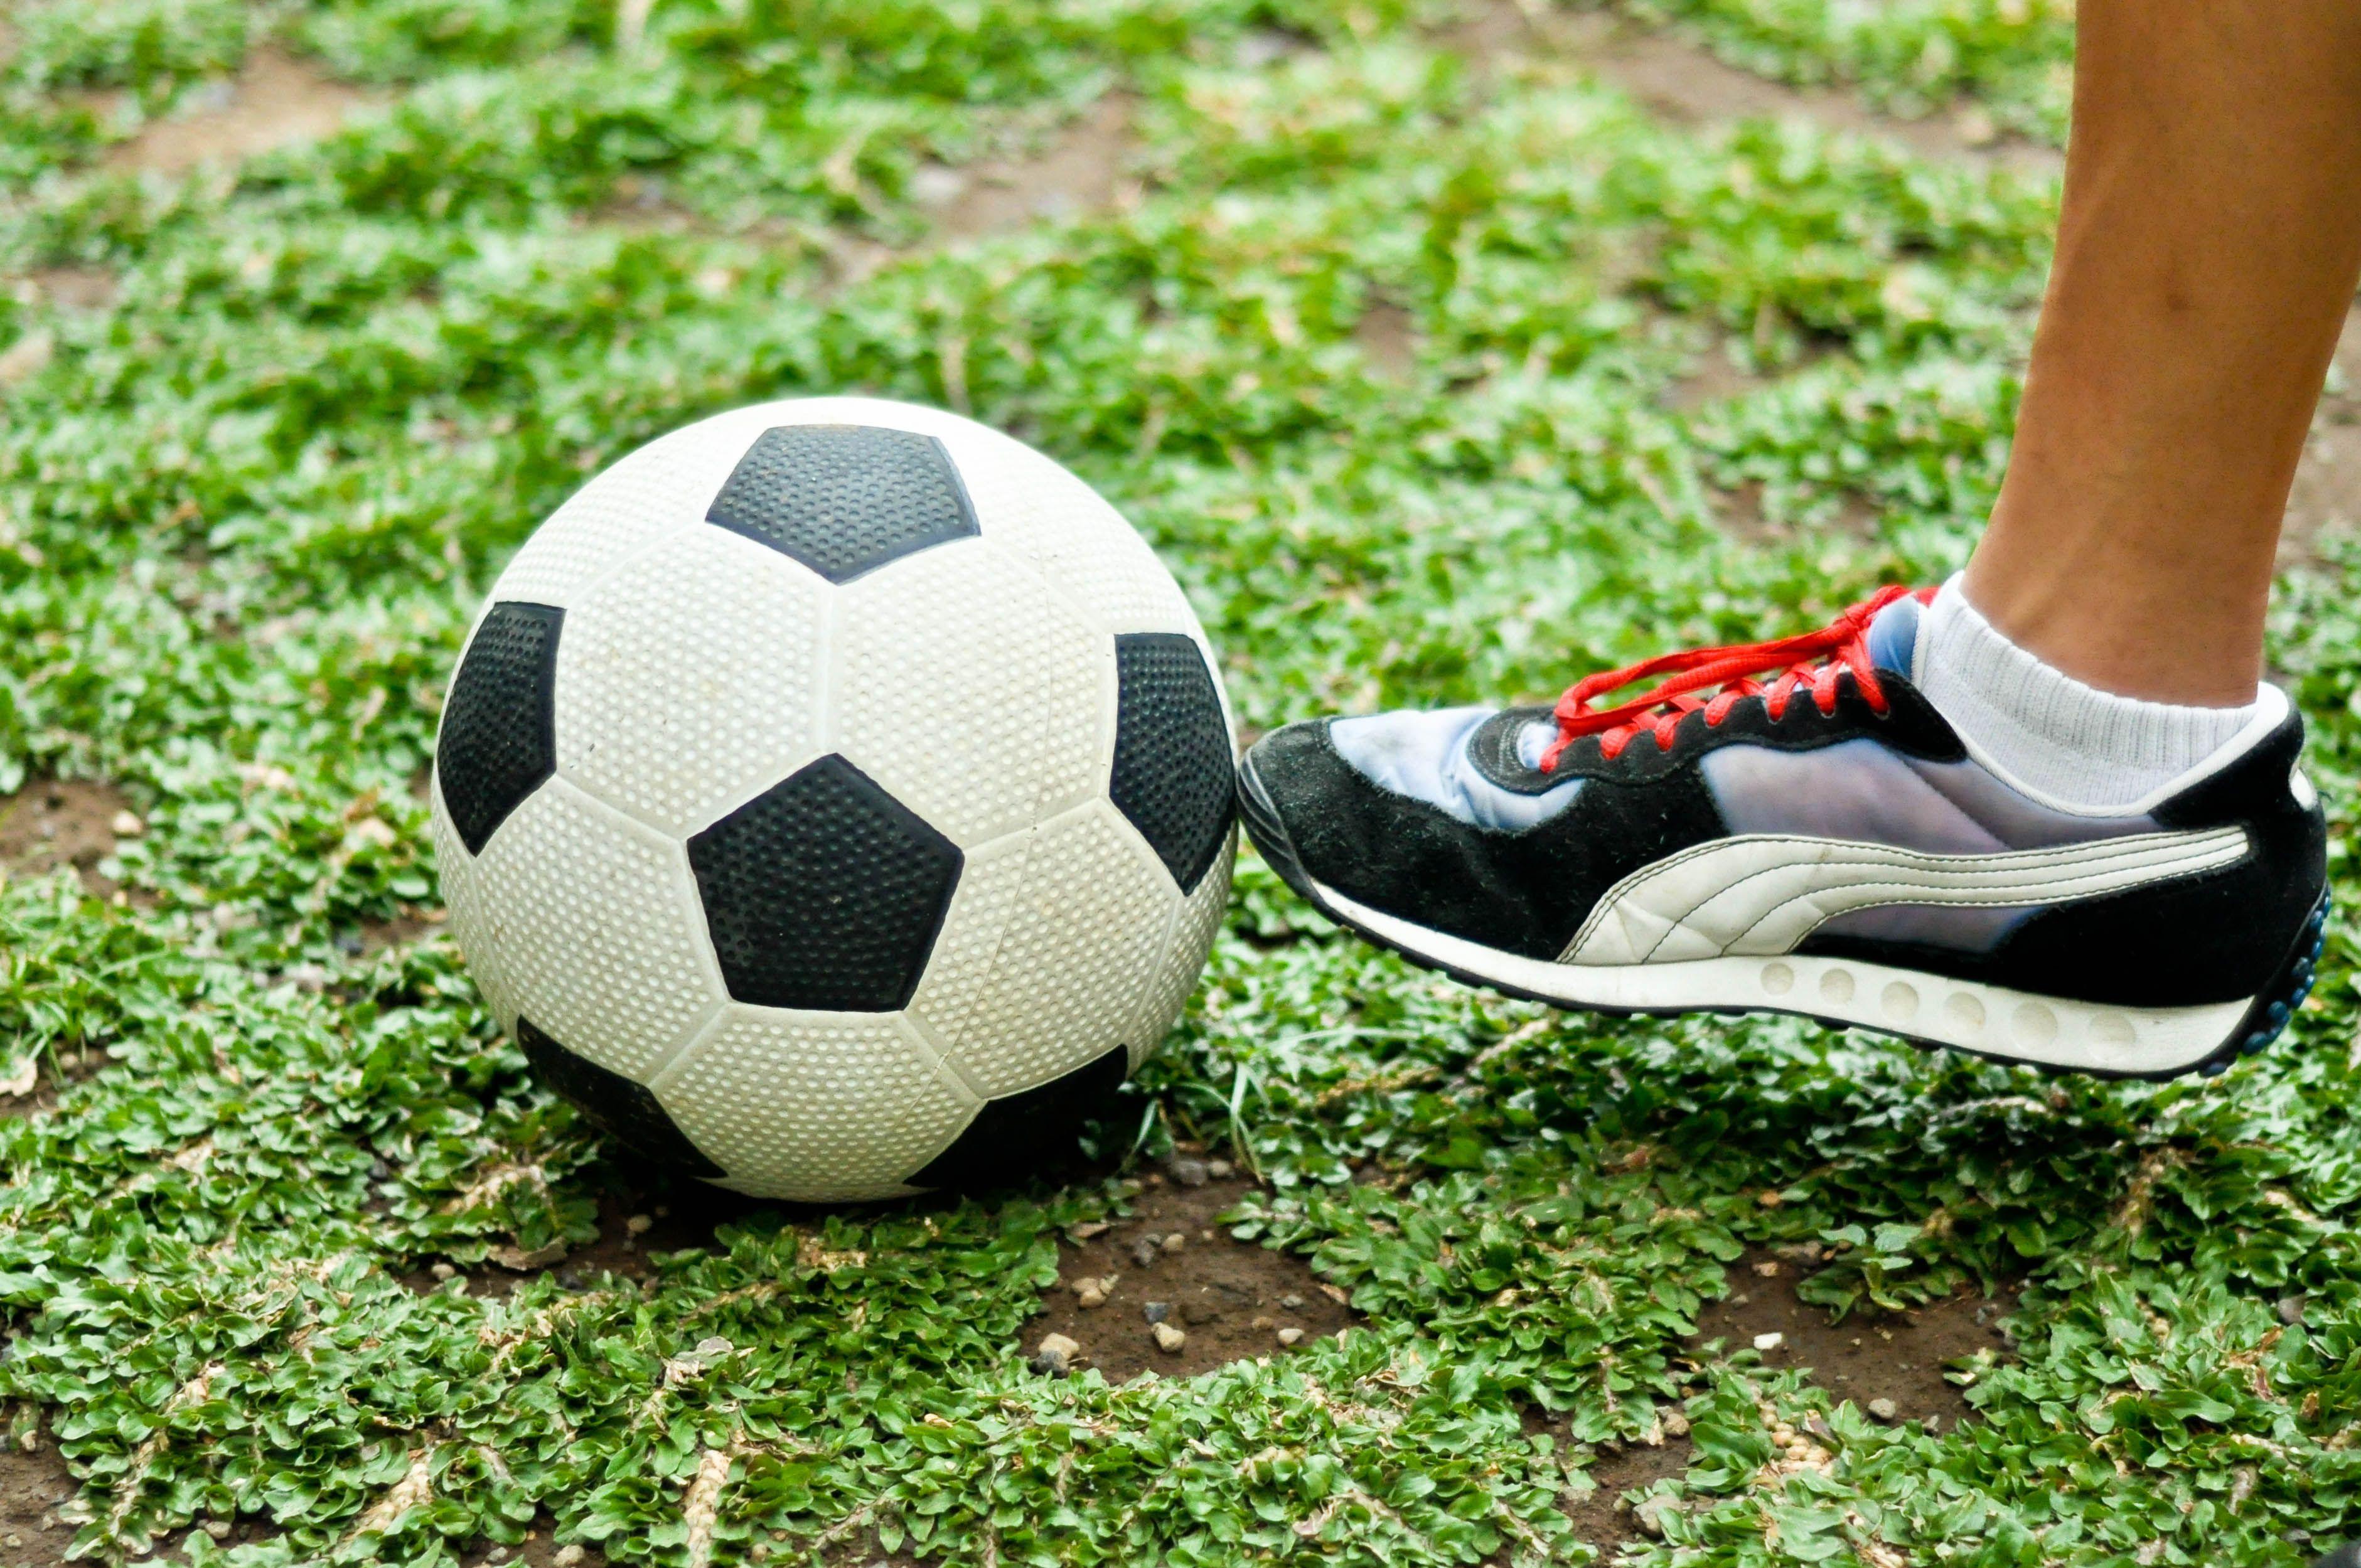 Shoe Kicking Soccer Ball Logo - How to Get a Better Kick in Soccer: 6 Steps (with Pictures)